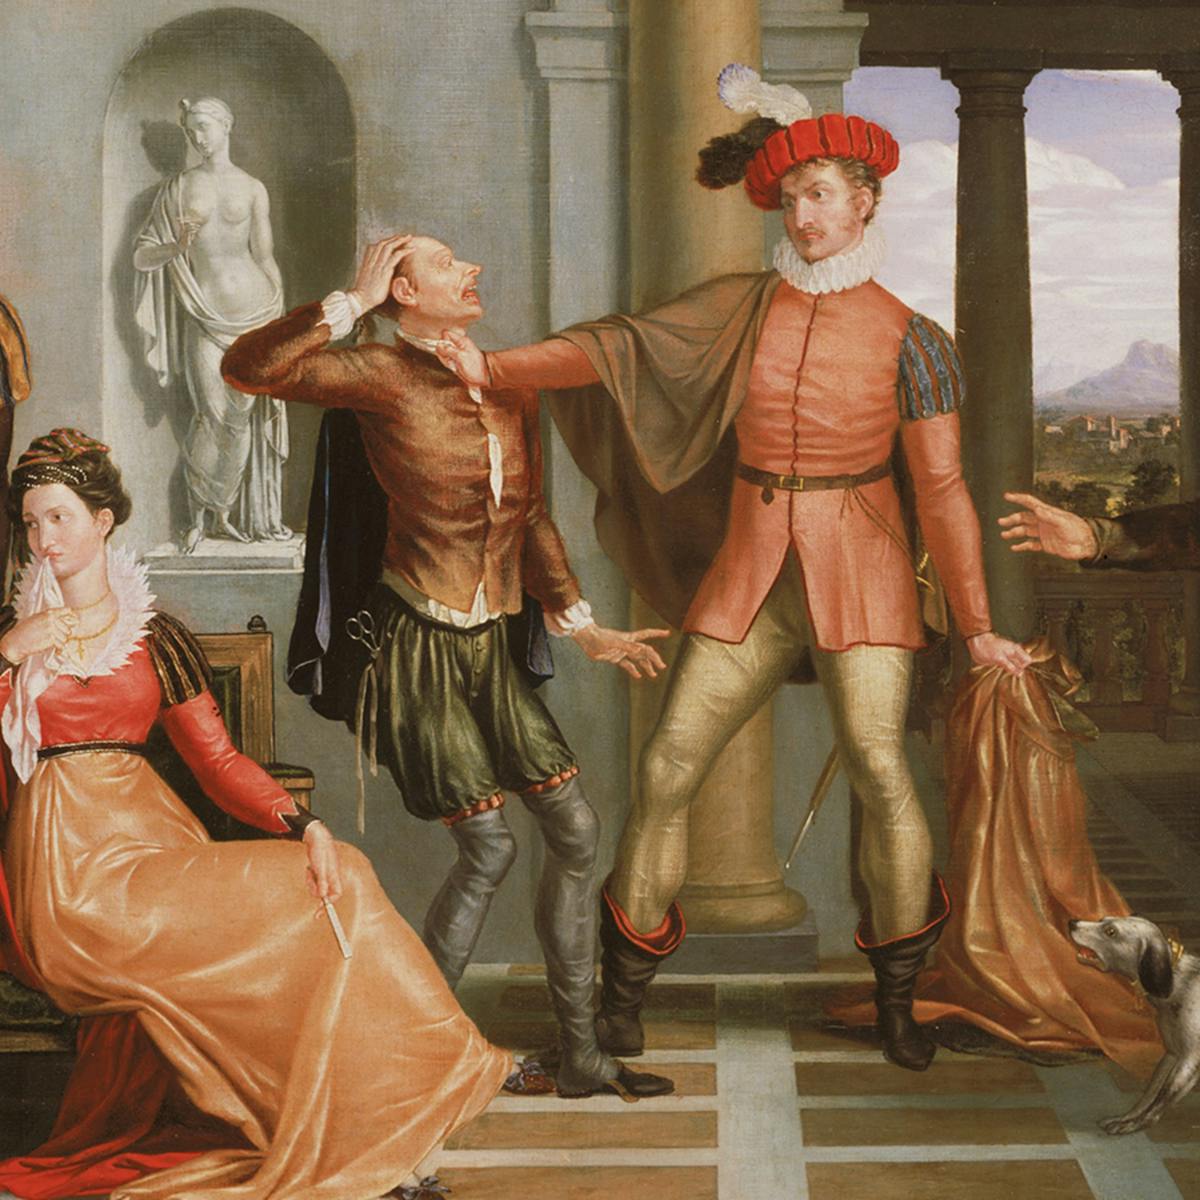 A scene from the Taming of the Shrew by William Shakespeare